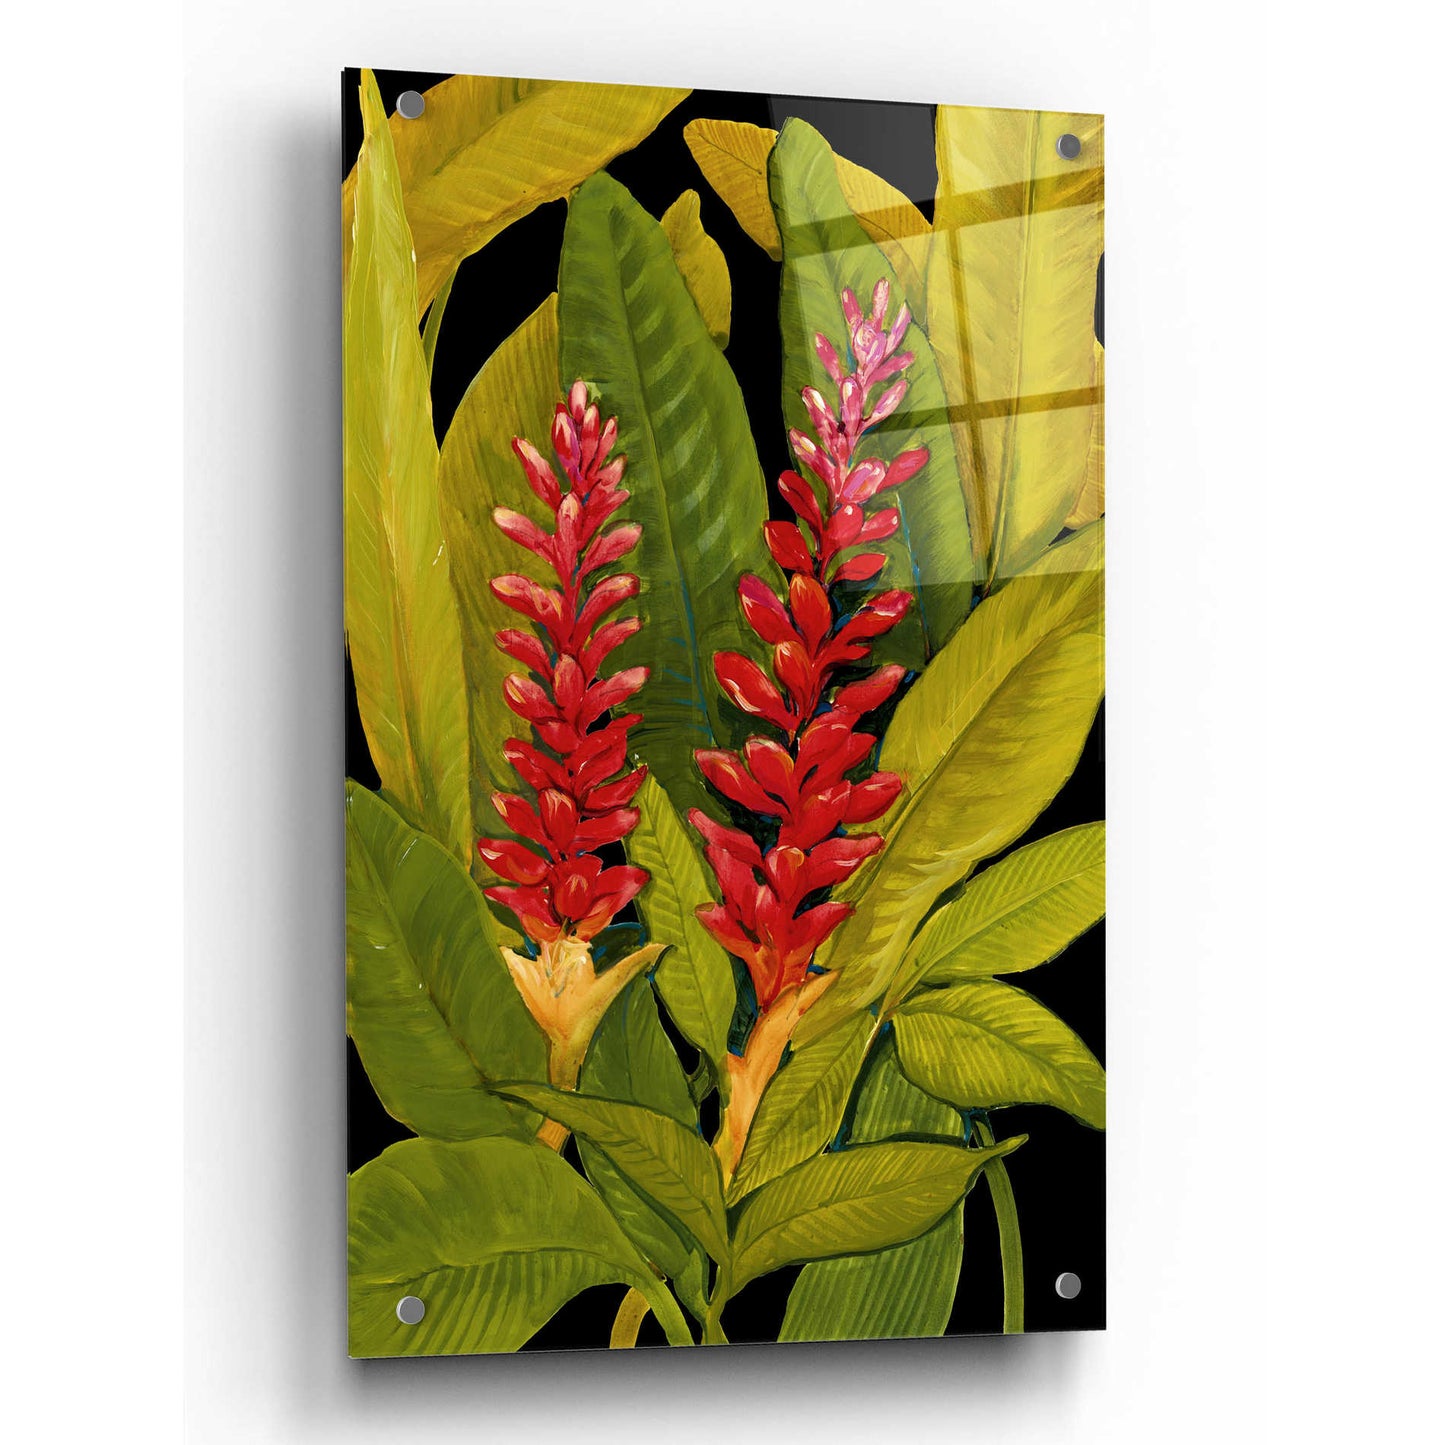 Epic Art 'Dramatic Red Ginger' by Tim O'Toole, Acrylic Glass Wall Art,24x36